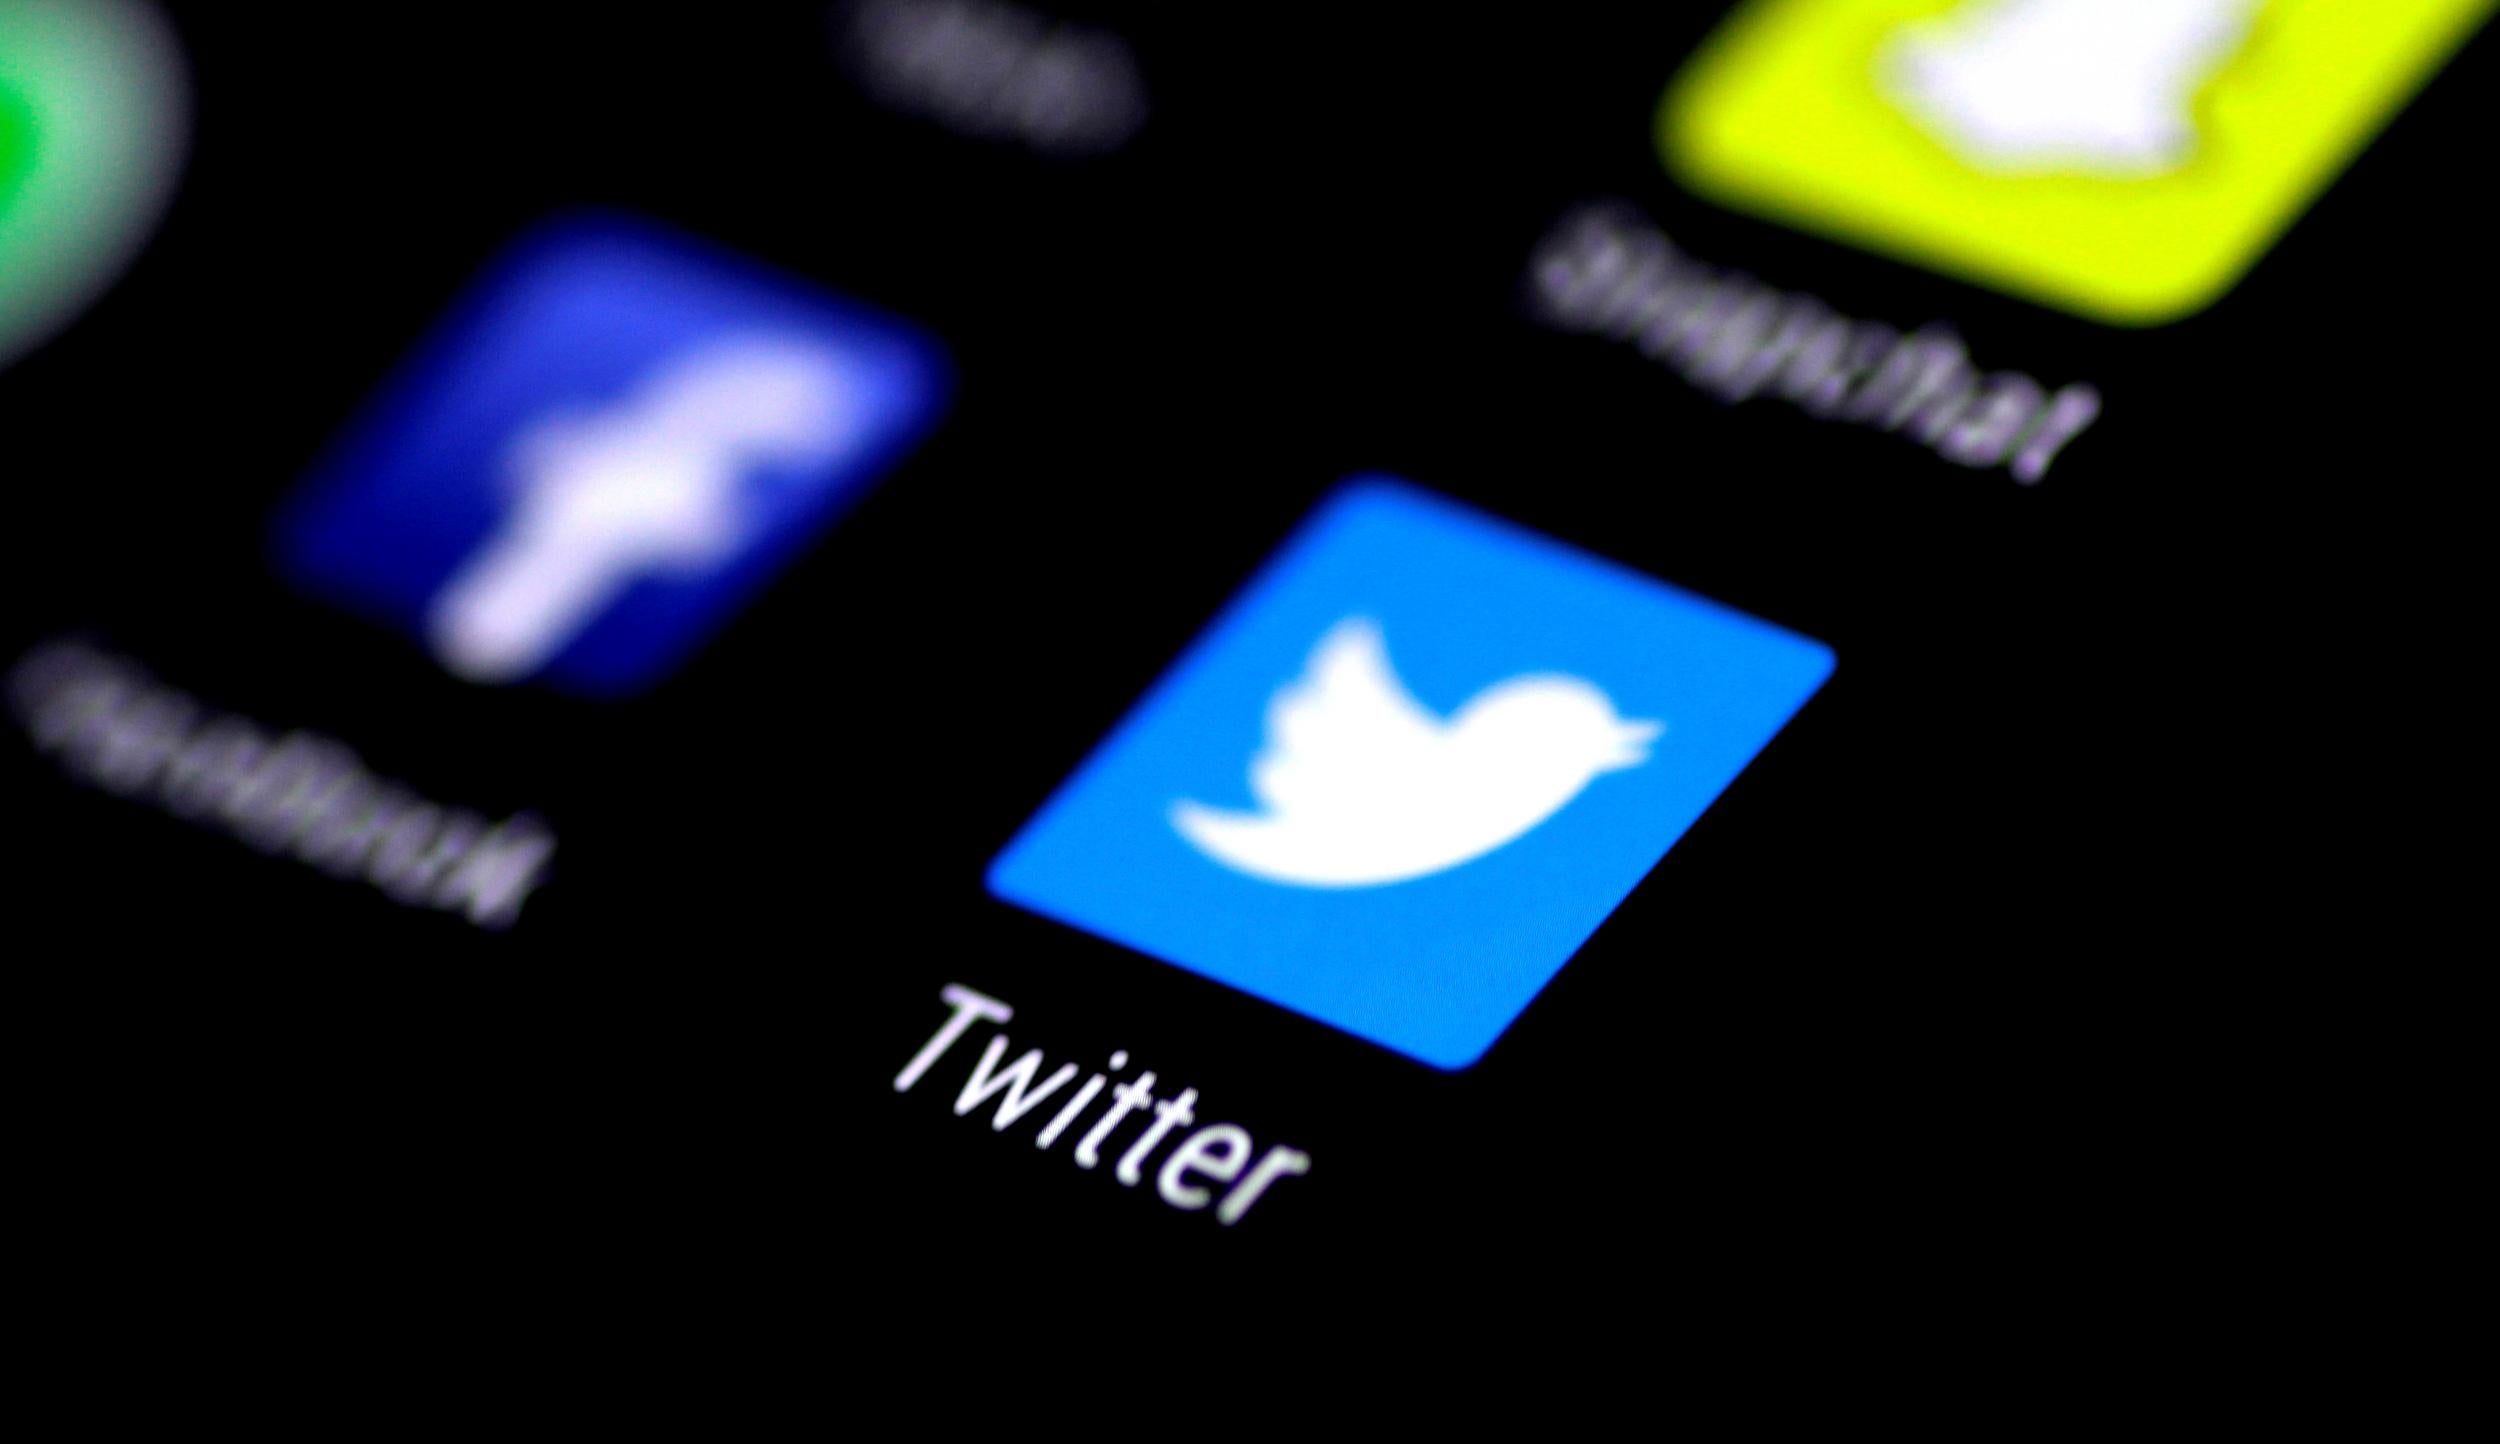 Twitter said it has been making improvements in the area of online safety